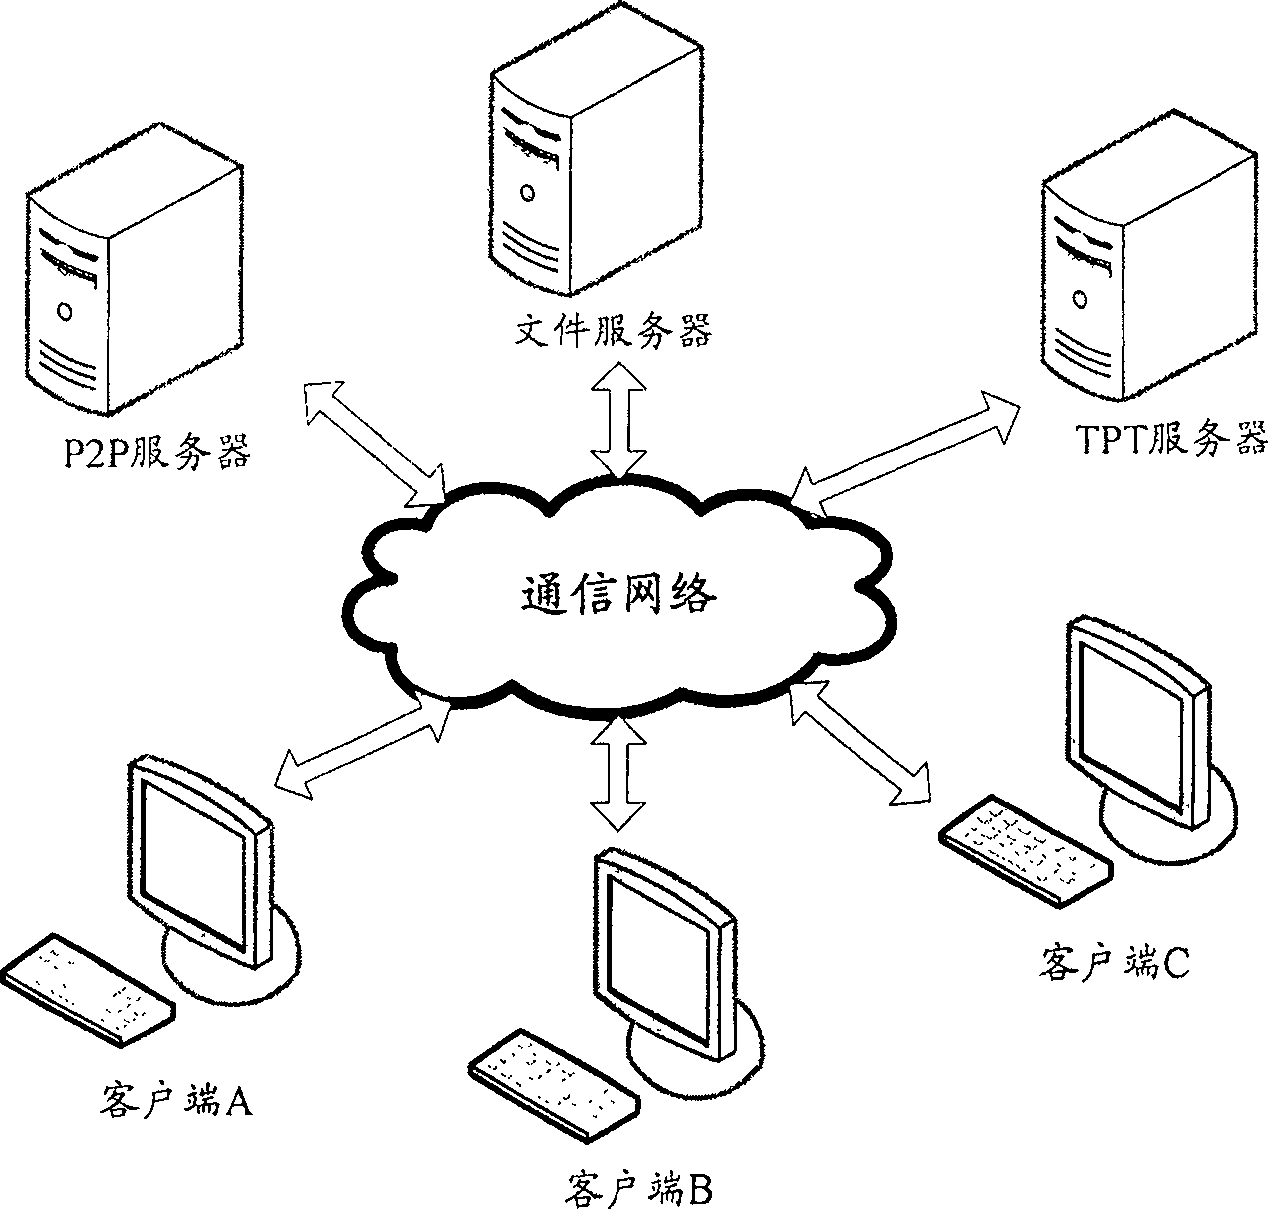 Network communication system and method realizing file downloading